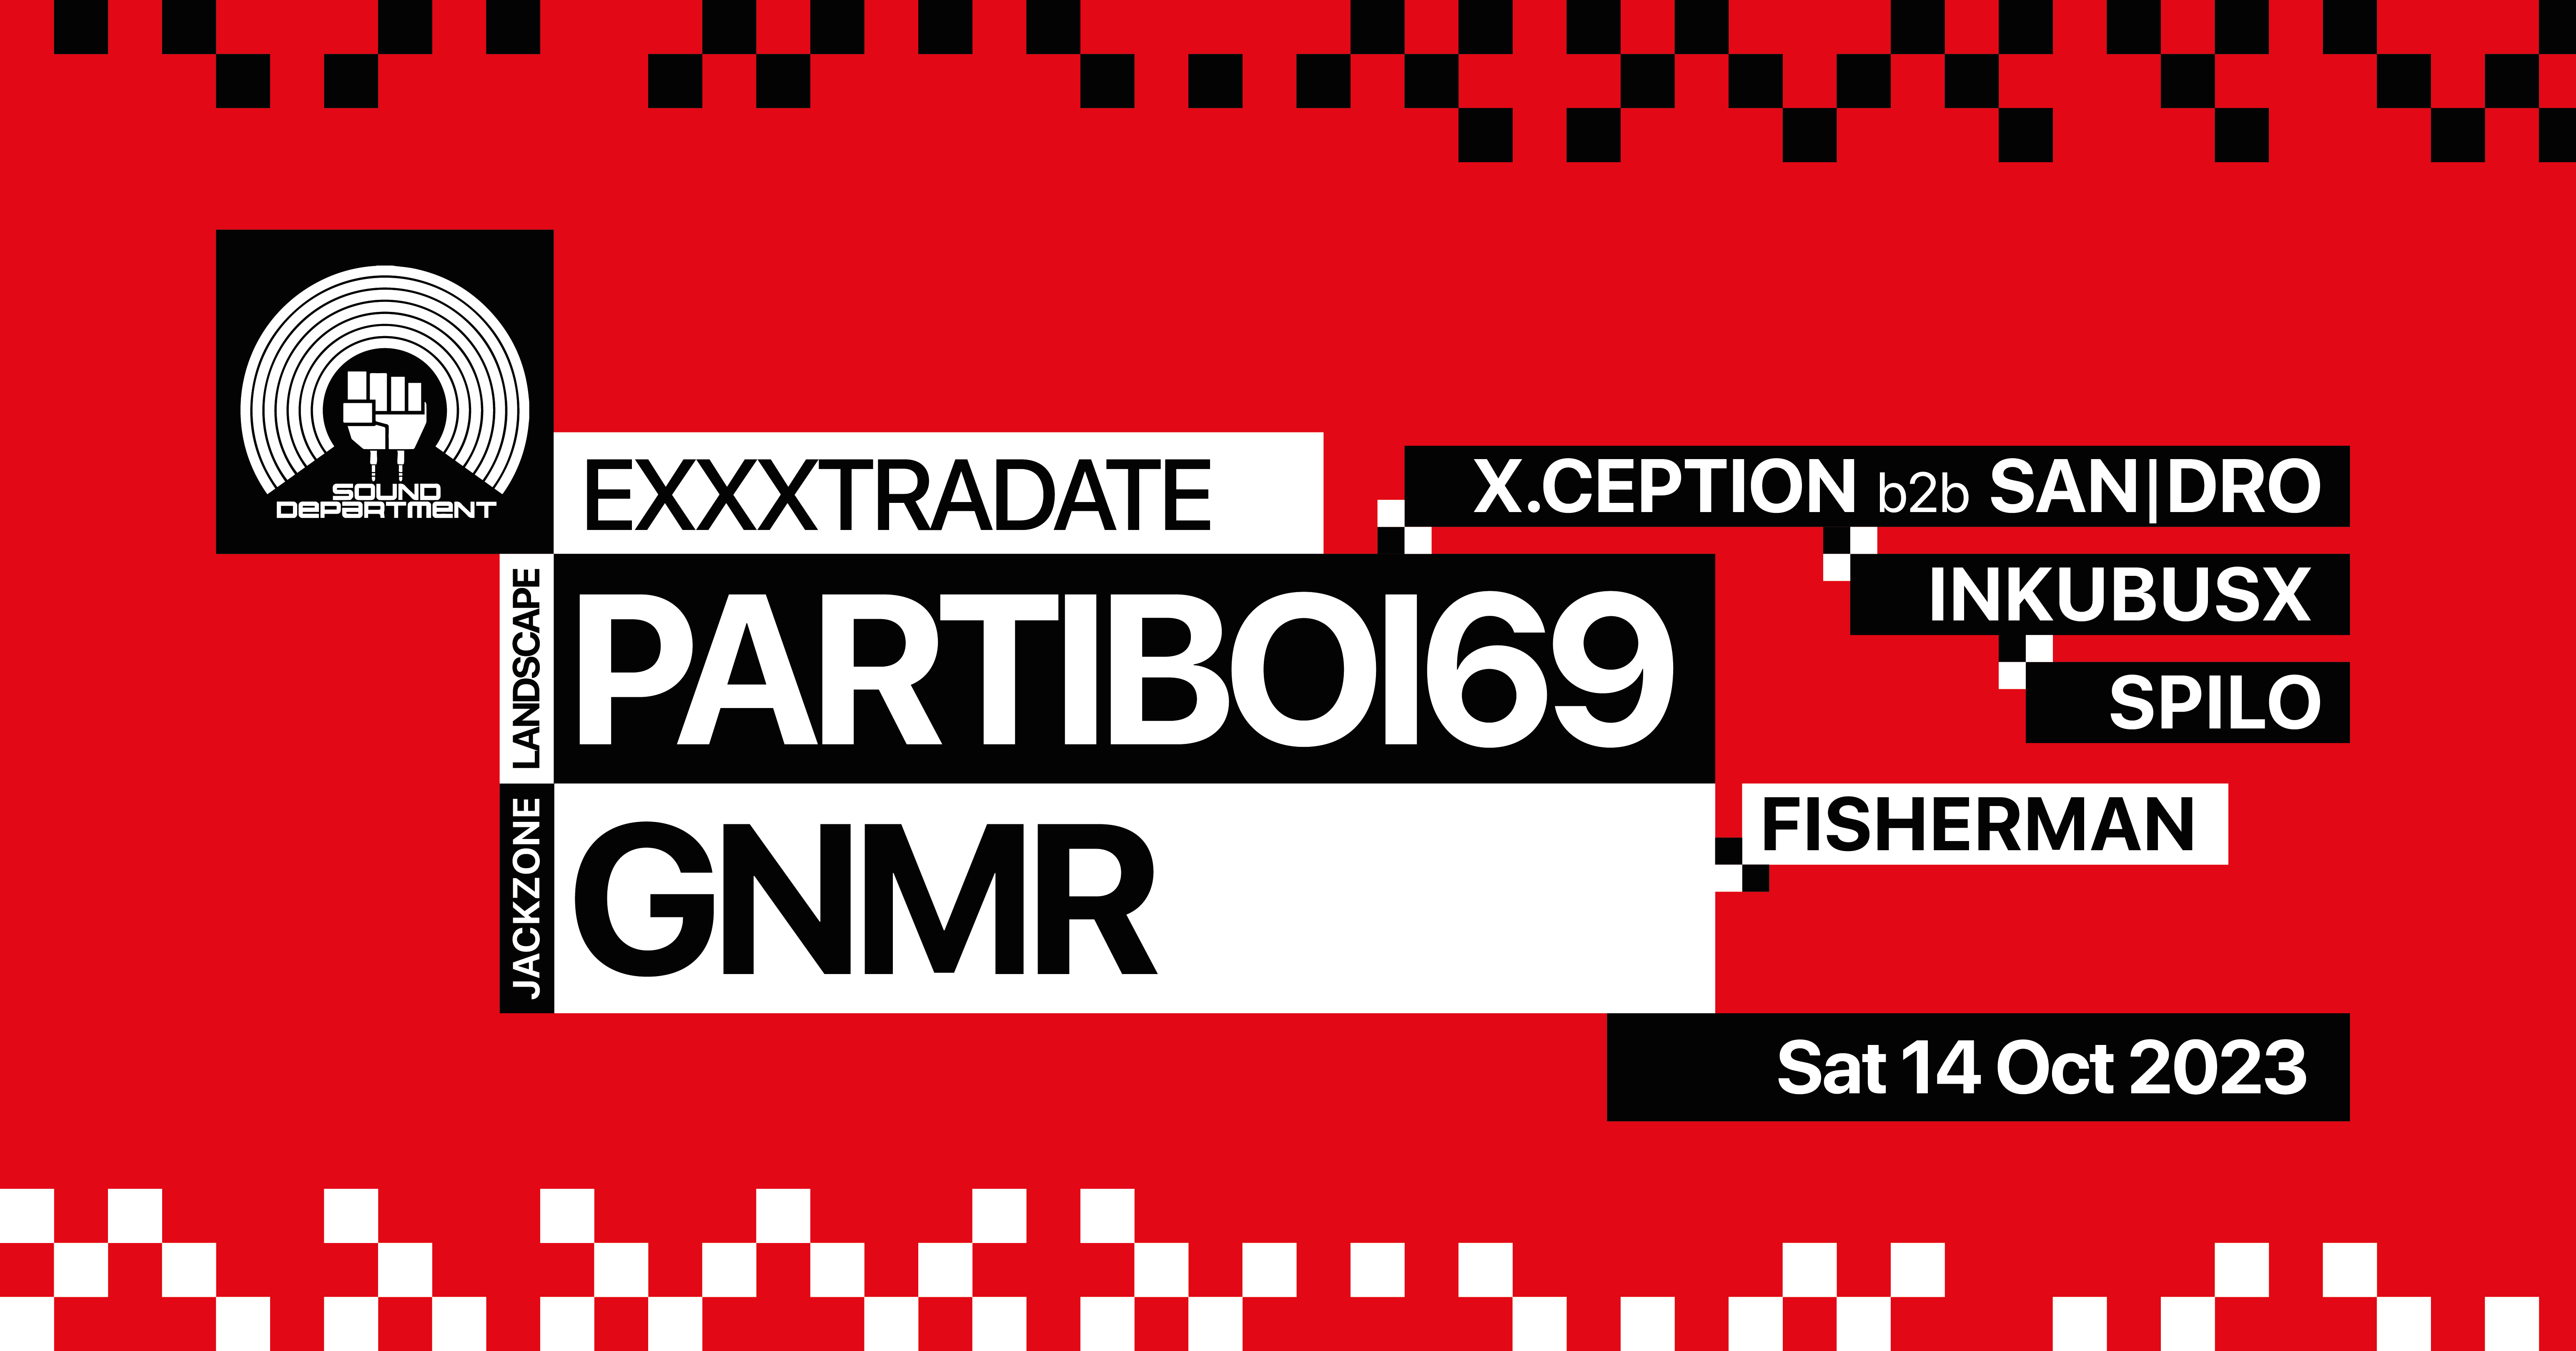 EXTRA DATE Sound Department 14/10 with Partiboi69 and GNMR - Página frontal